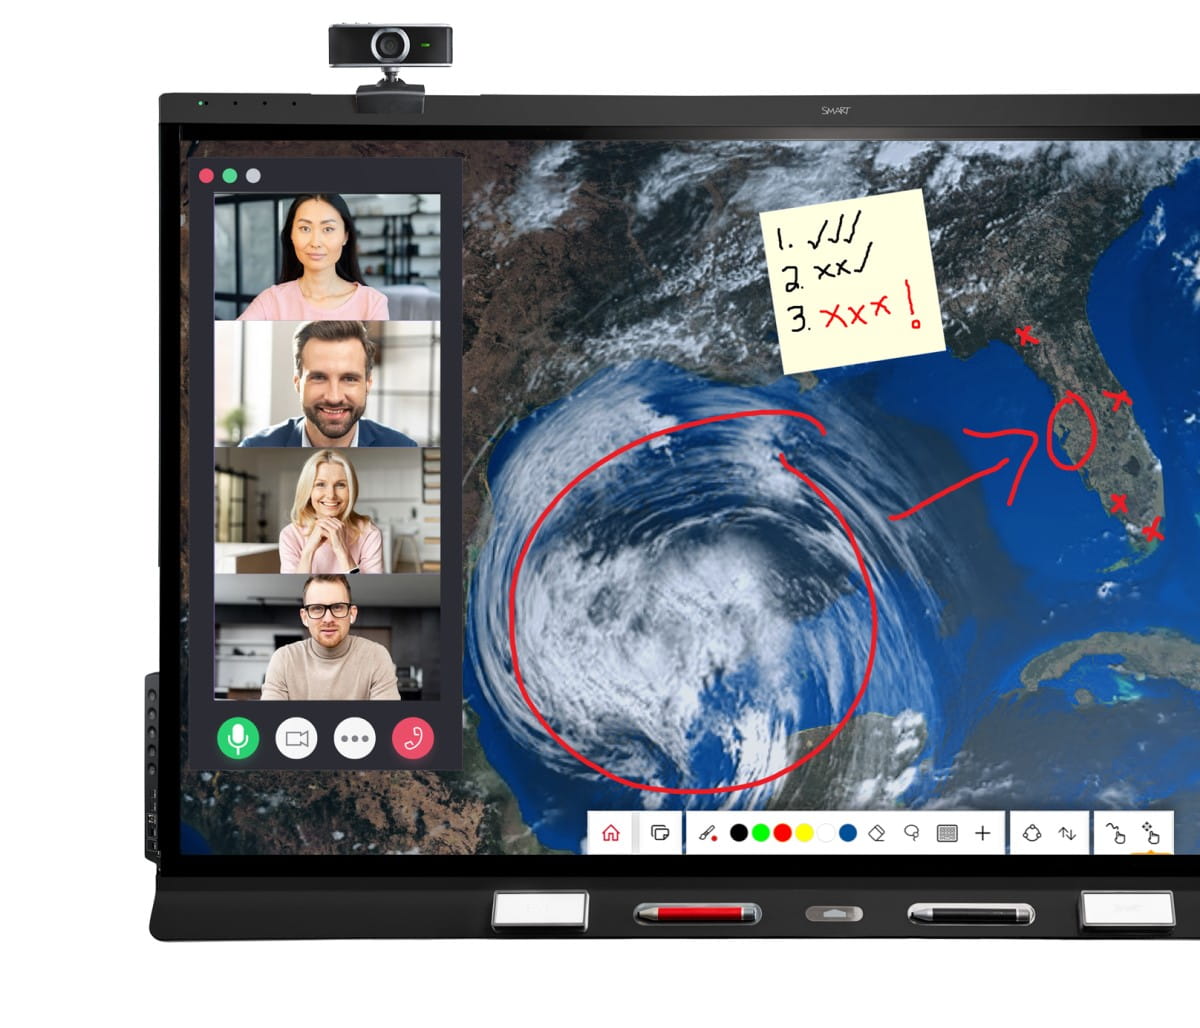 SMART display with a live video call featuring four participants on the left side. The main screen showcases an aerial view of a hurricane with annotated details, a sticky note with three listed items, and marked locations on the adjacent land.